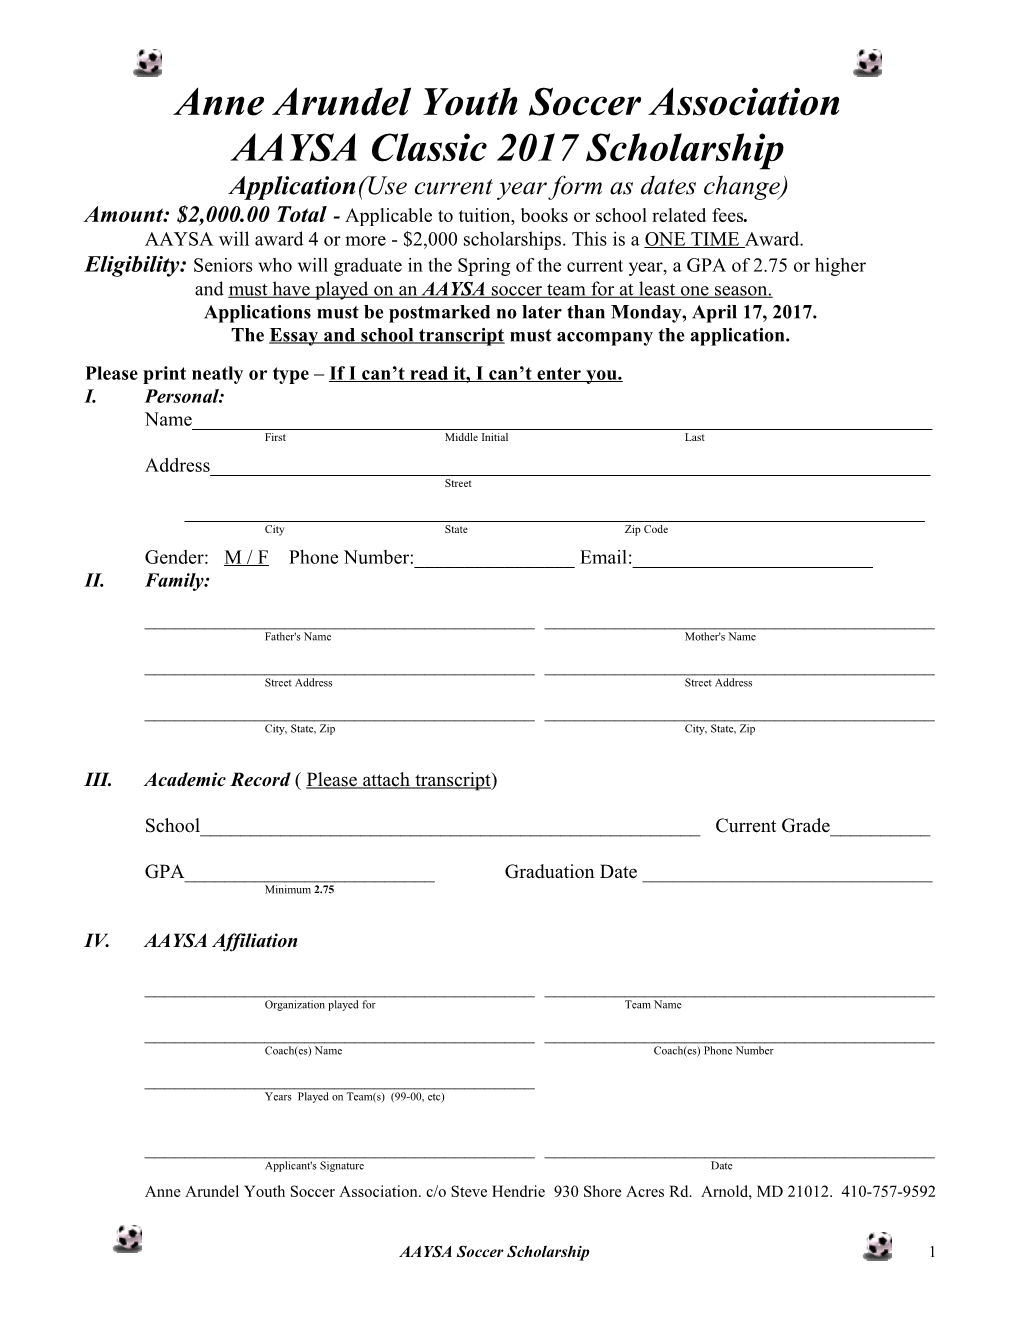 Application (Use Current Year Form As Dates Change)